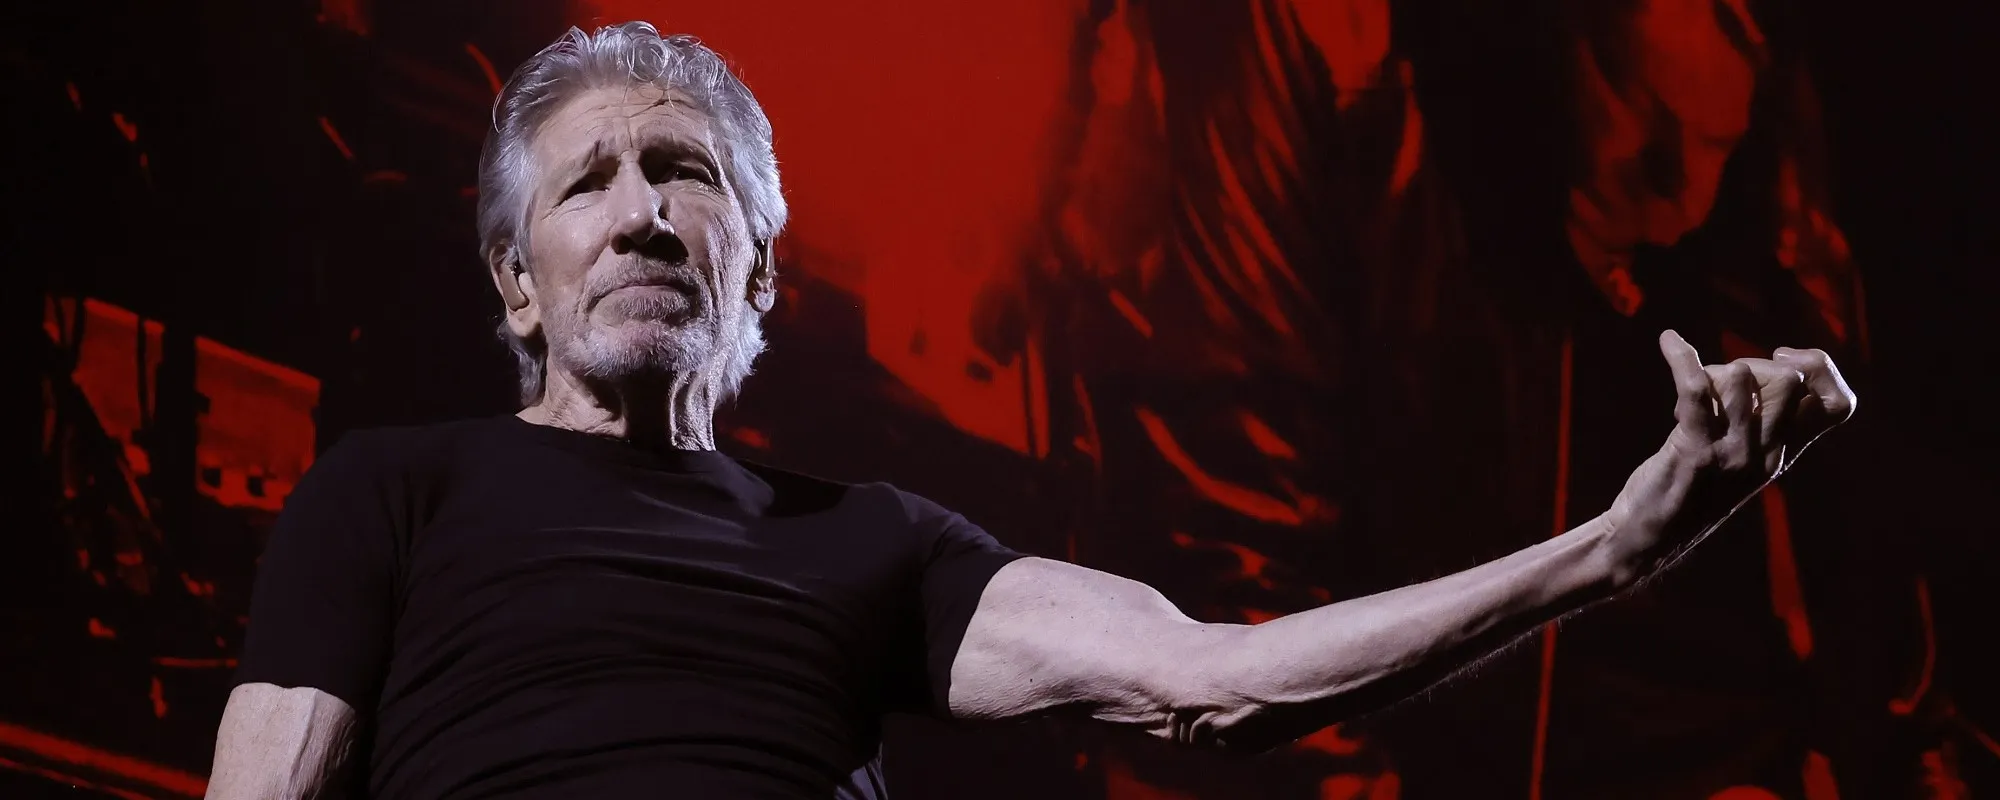 The Six-Part Pink Floyd Song Roger Waters and David Gilmour Ended Up Hating